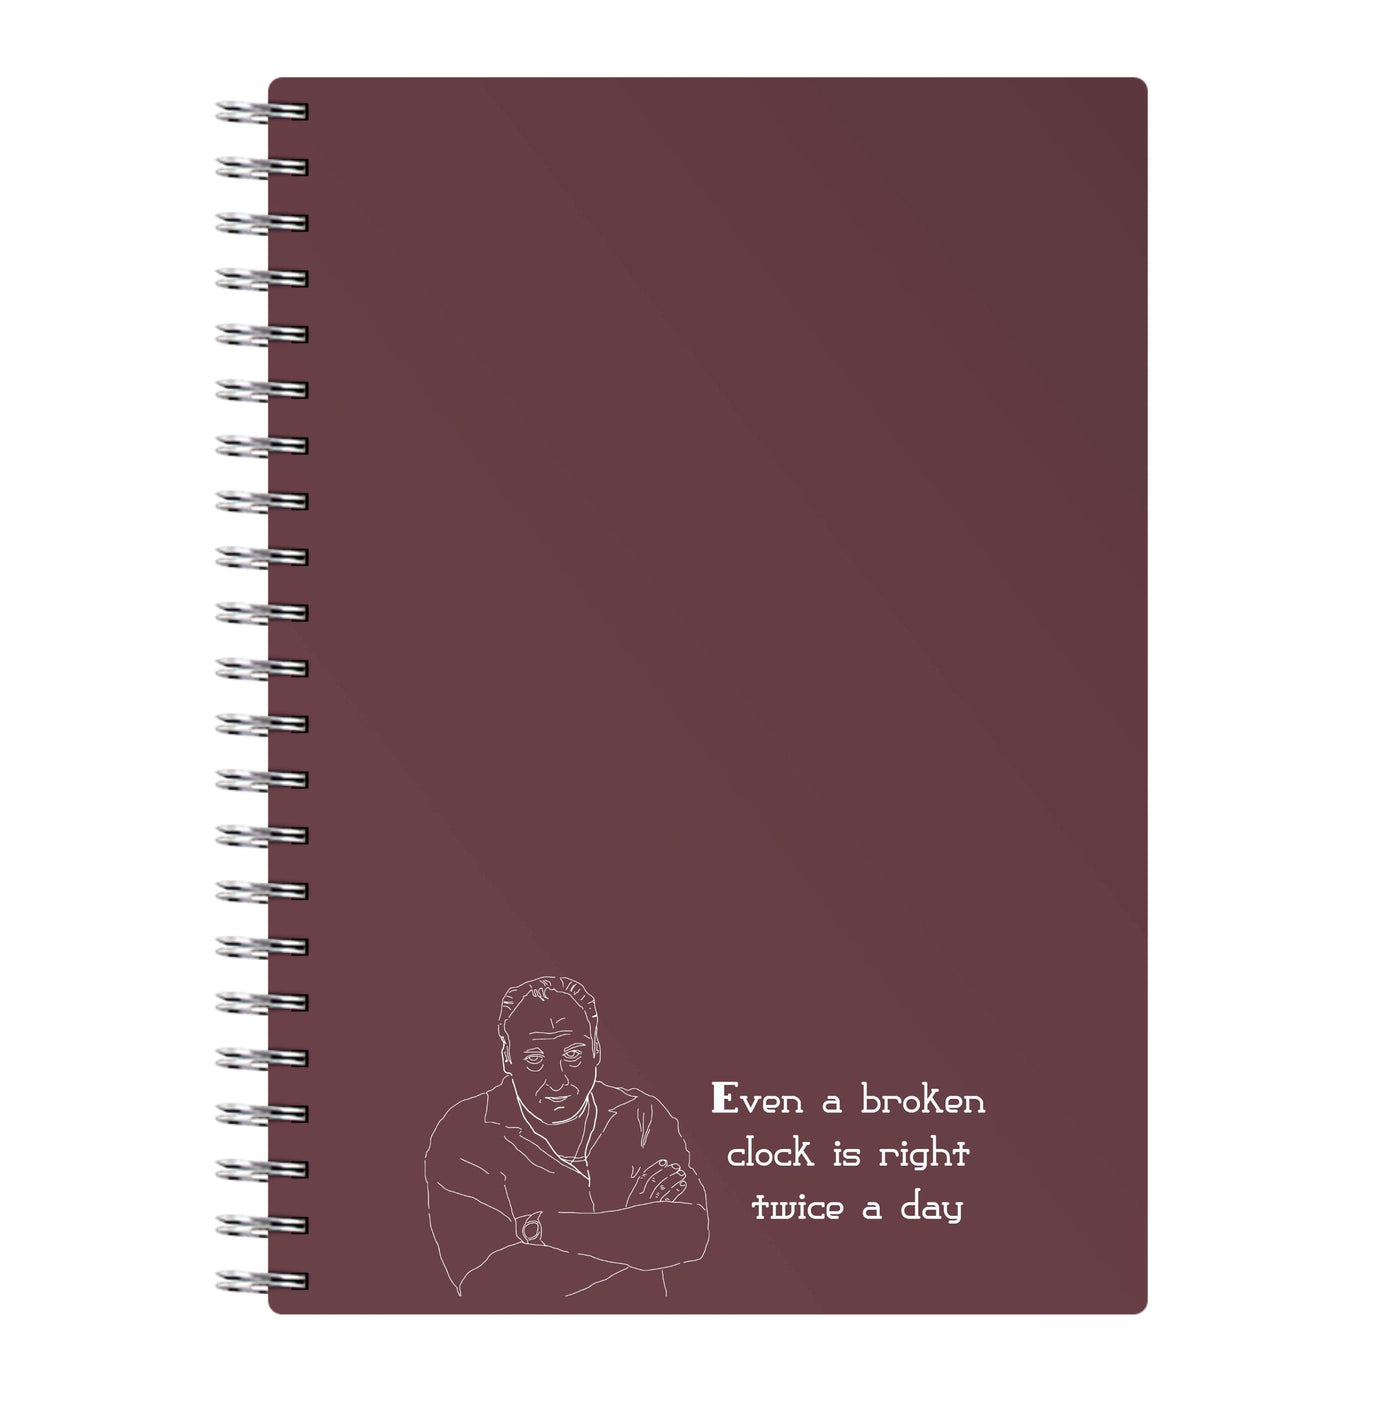 Even A Broken Clock Is Right Twice A Day - The Sopranos Notebook